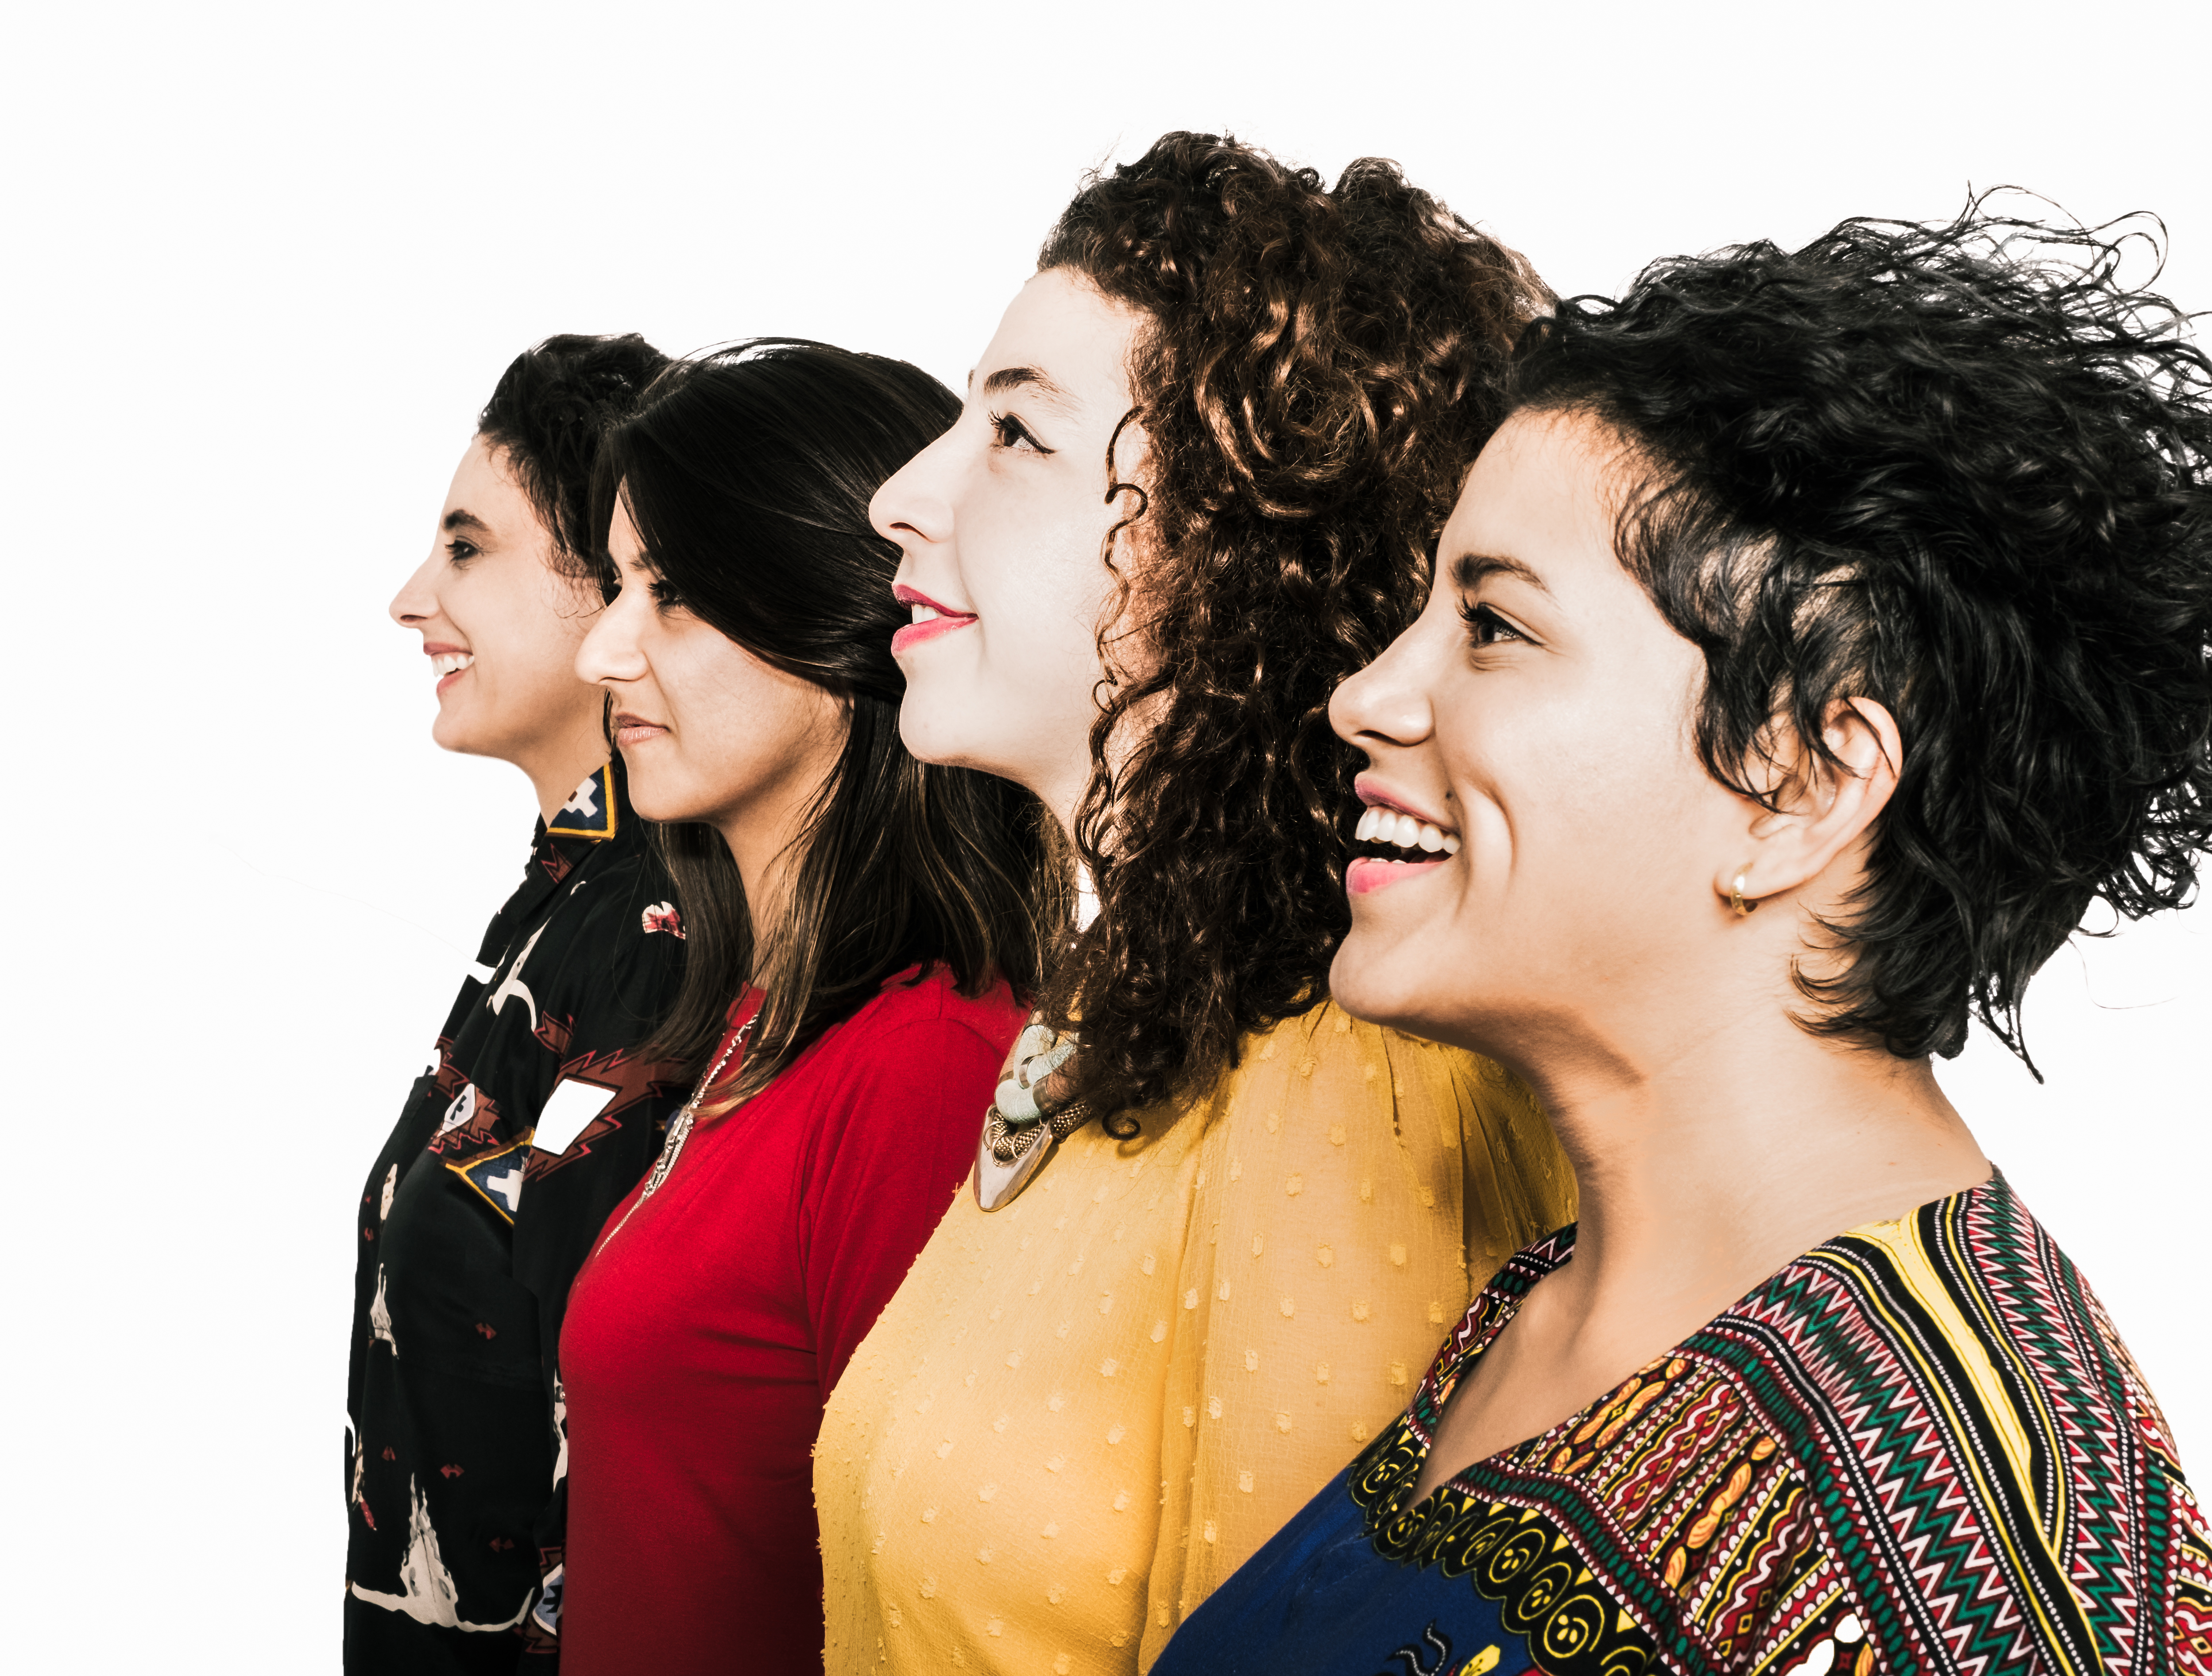 Introducing our latest addition to the Six Degrees family: LADAMA